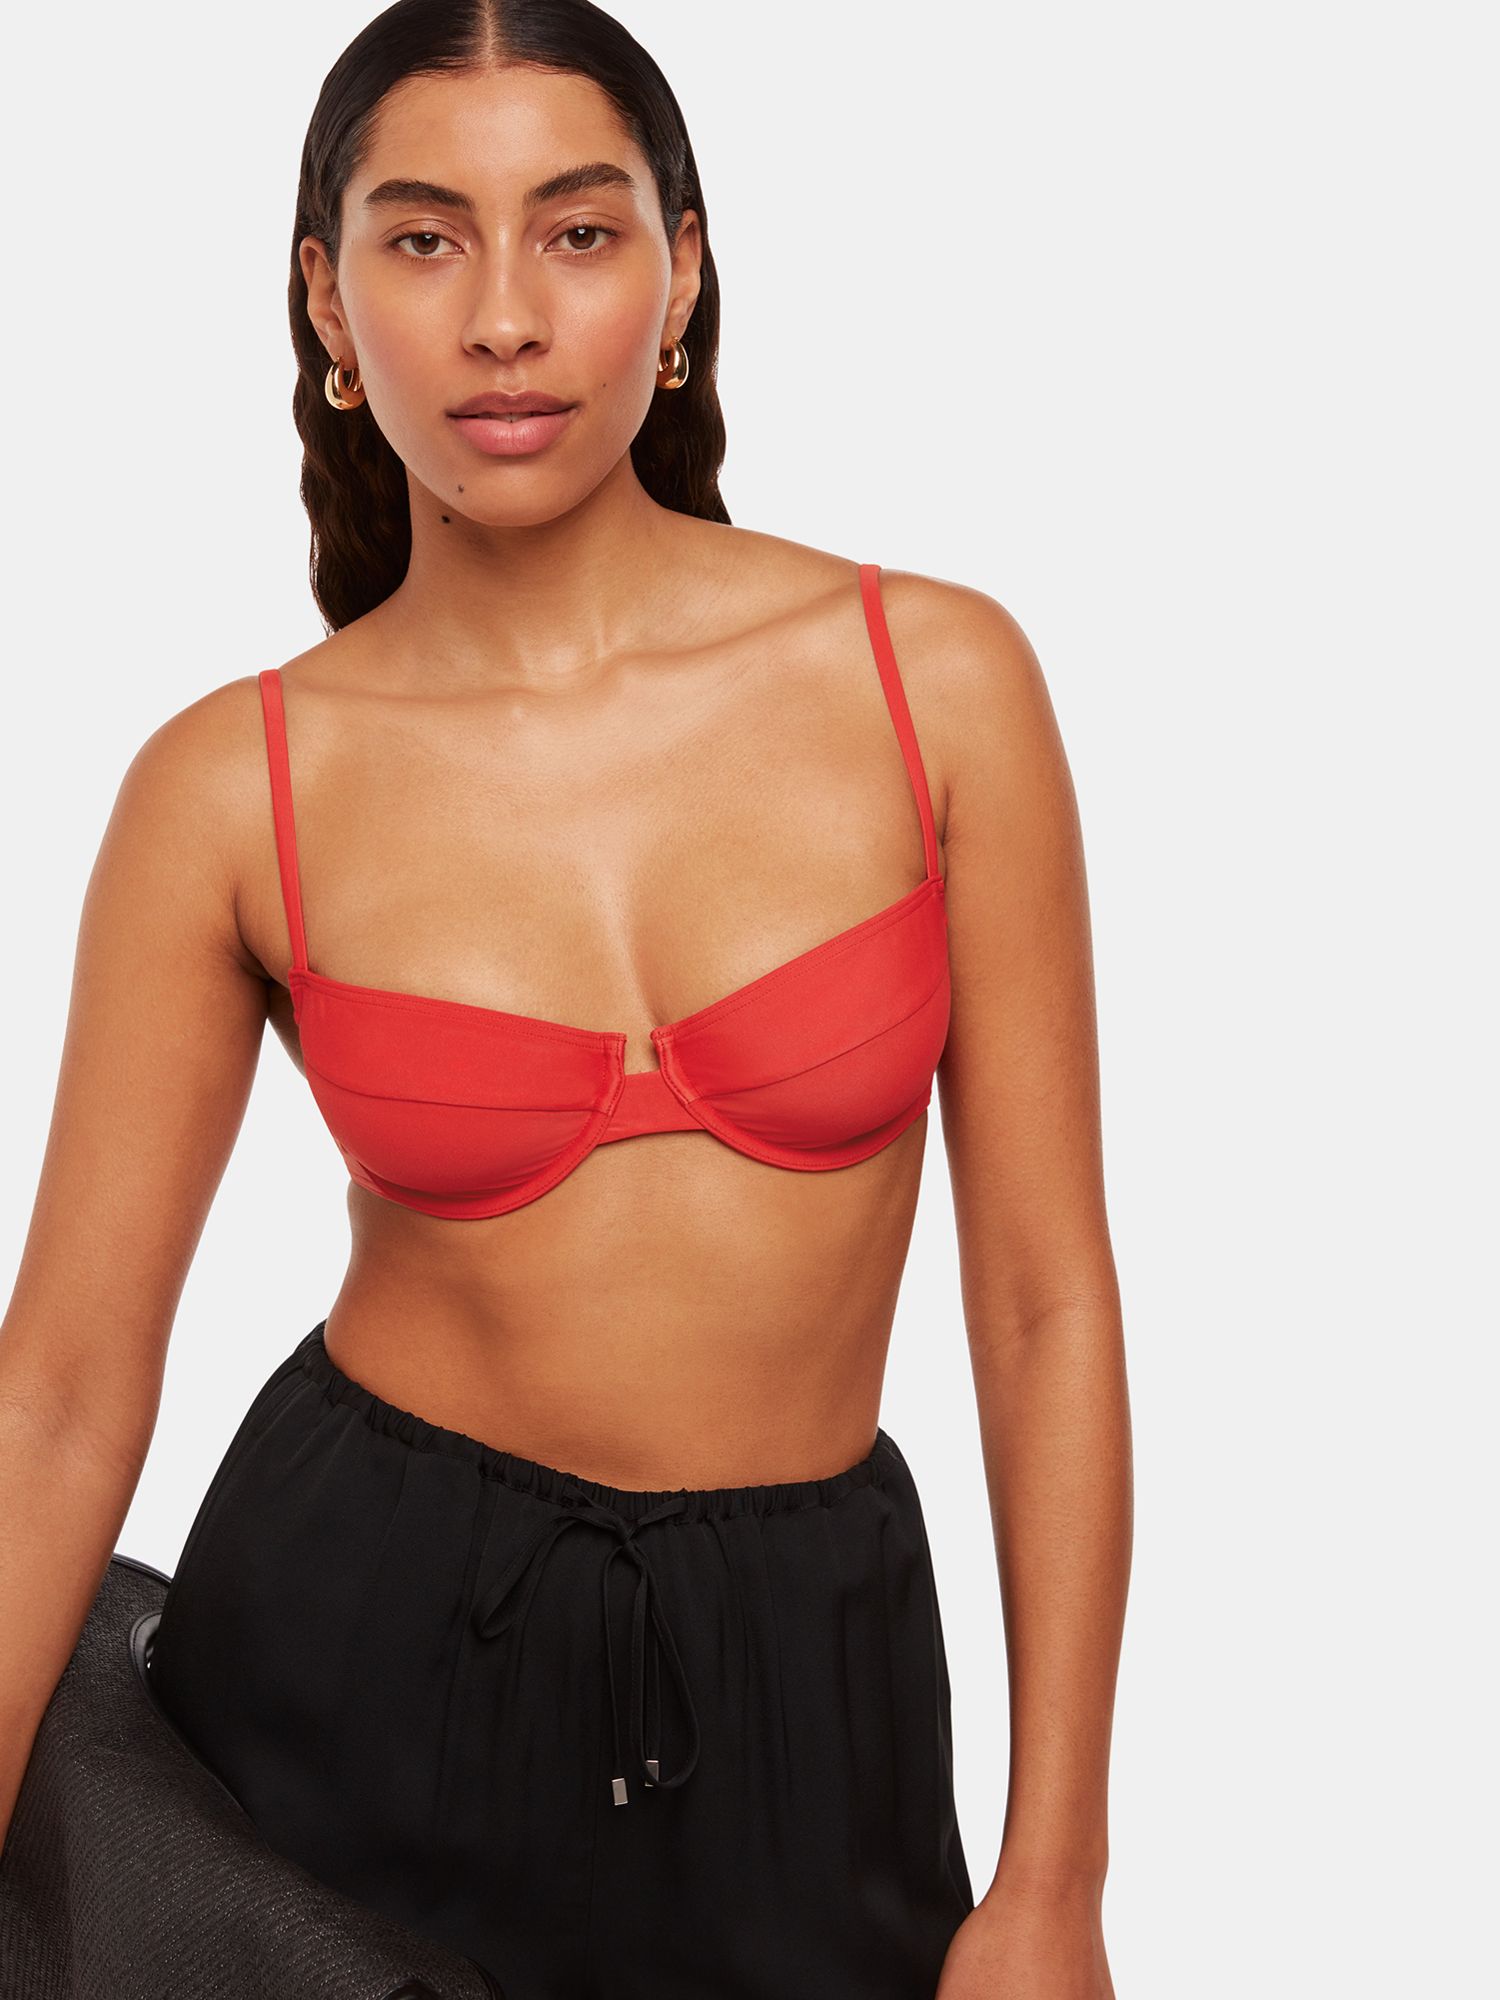 Whistles Lillie Underwired Bikini Top, Red, 6